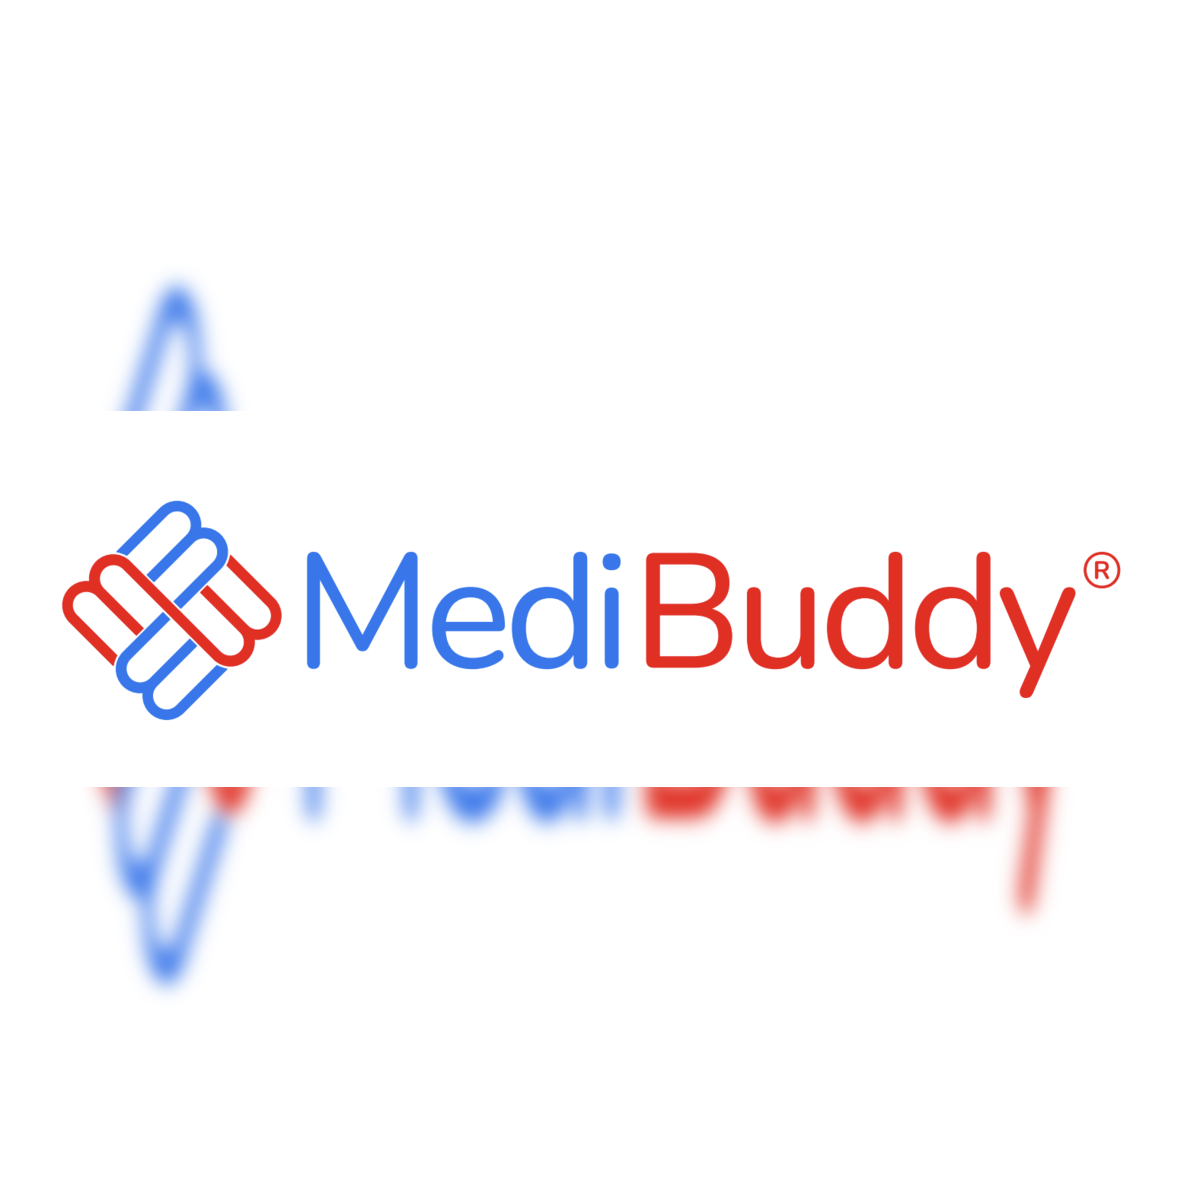 MediBuddy's revenue grows 58% in FY22, losses near Rs 250 Cr